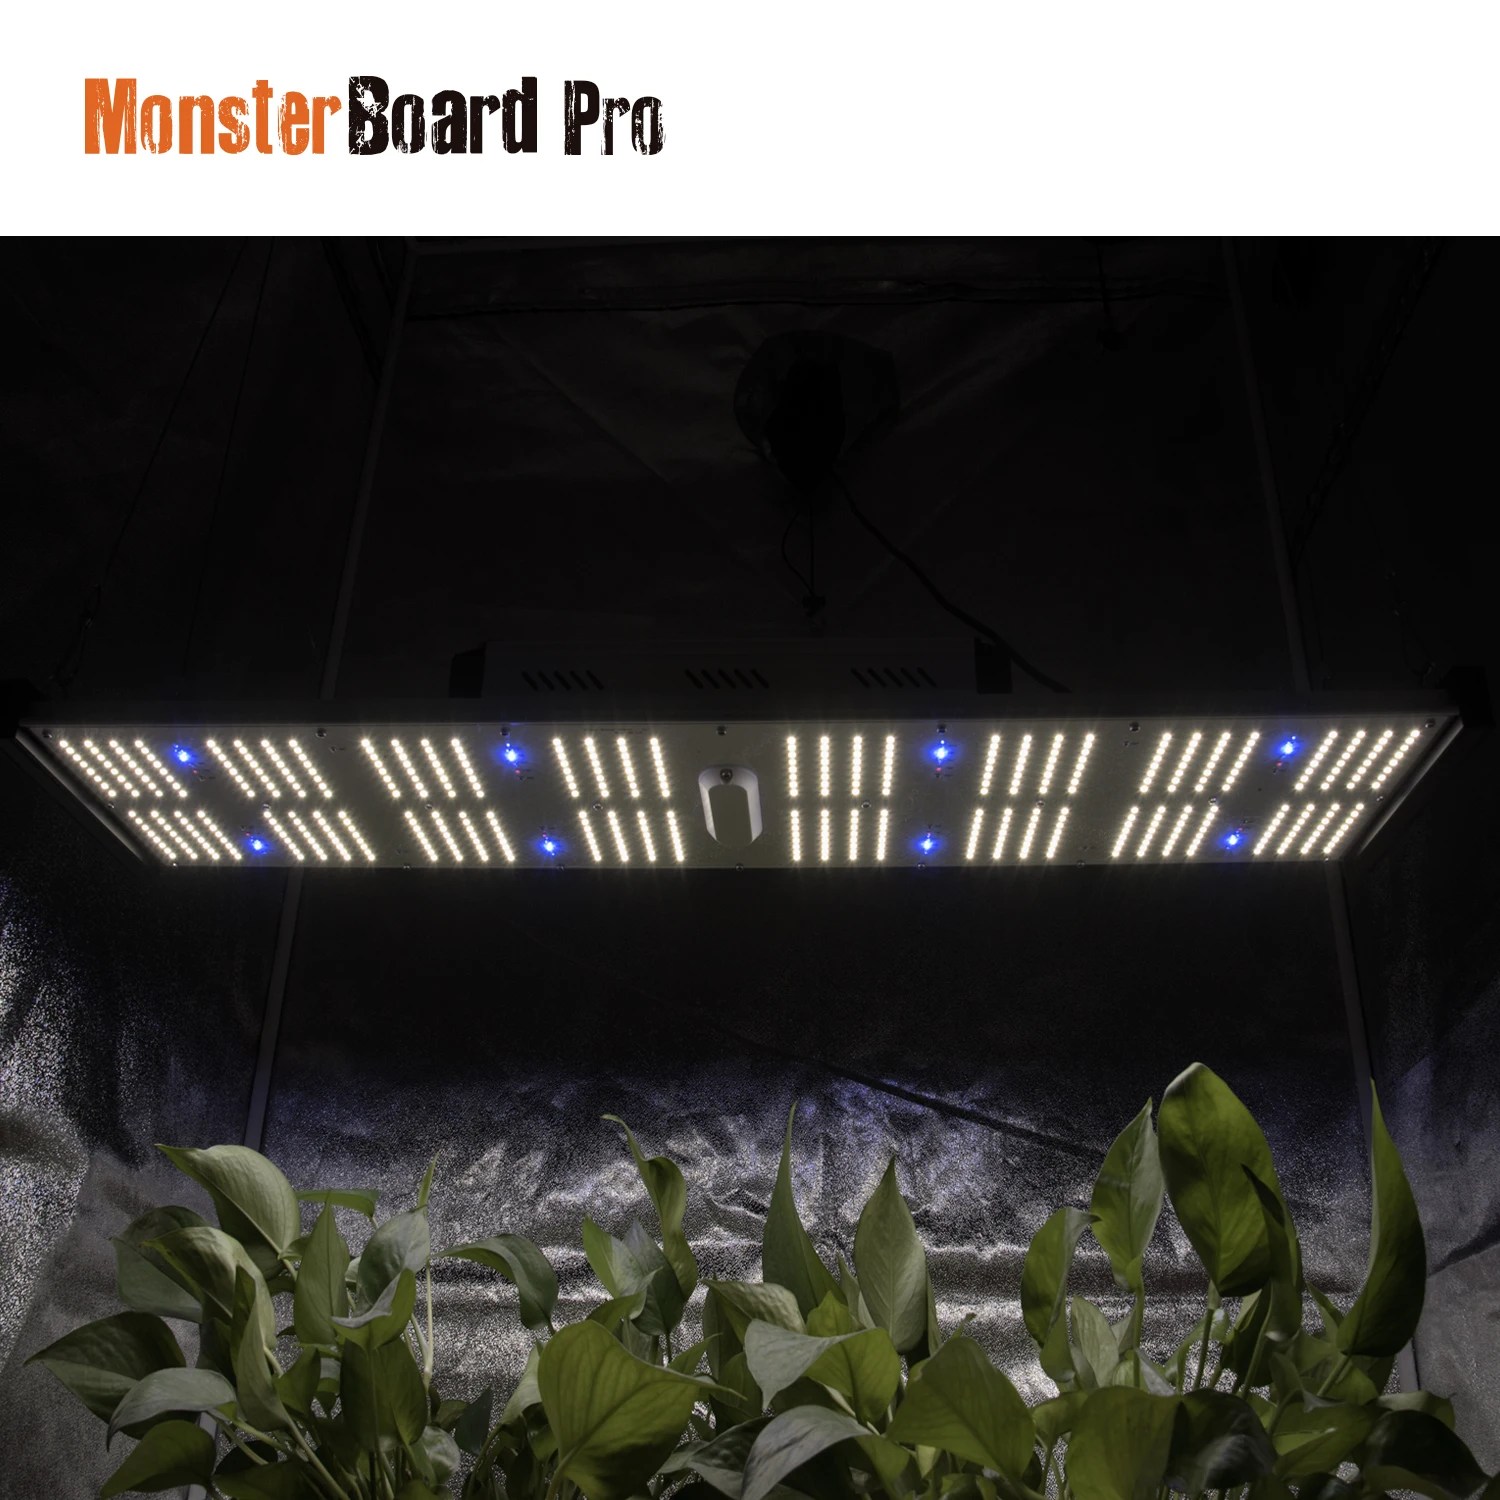 

Newest Samsung LM301H LED Grow Light 240W Geeklight Monster Board Pro UV IR Veg Bloom Switches Mode for Indoor Plants